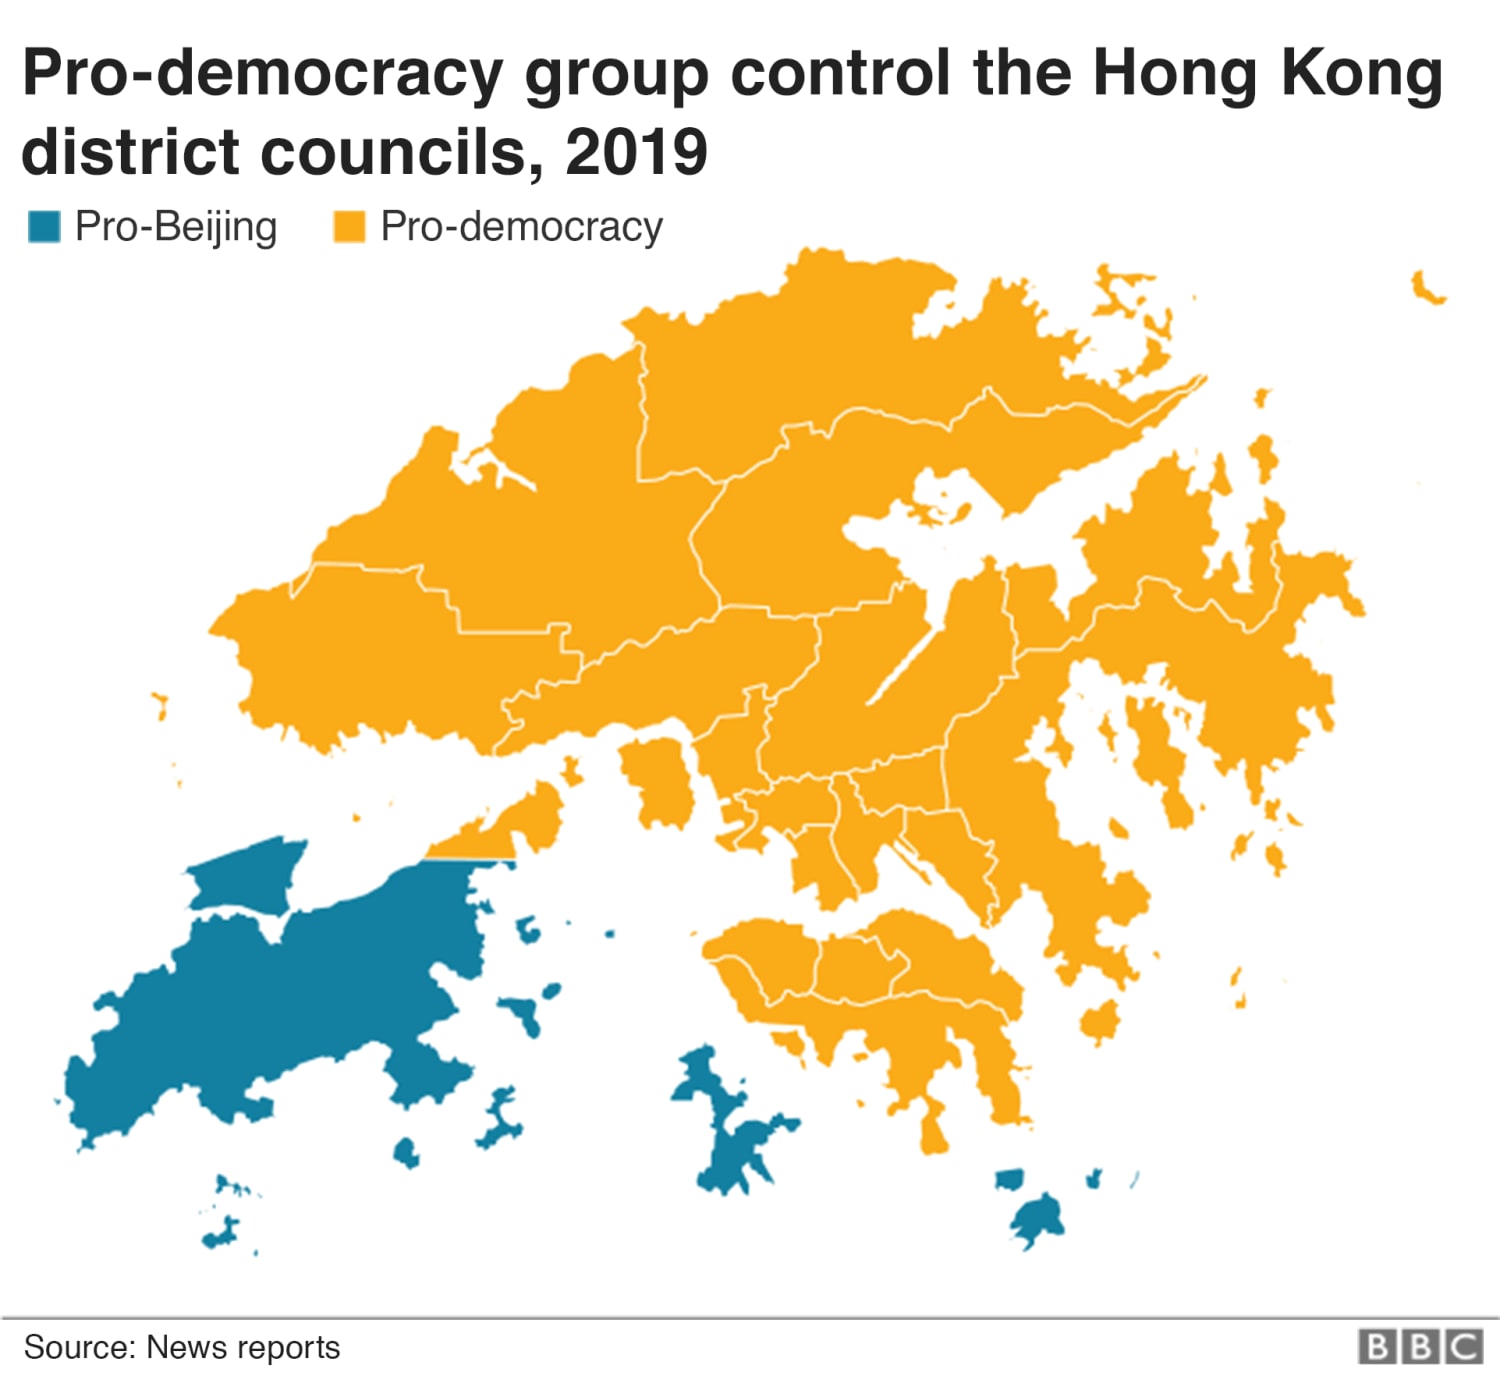 pro-democracy districts vs pro beijing districts in hong kong